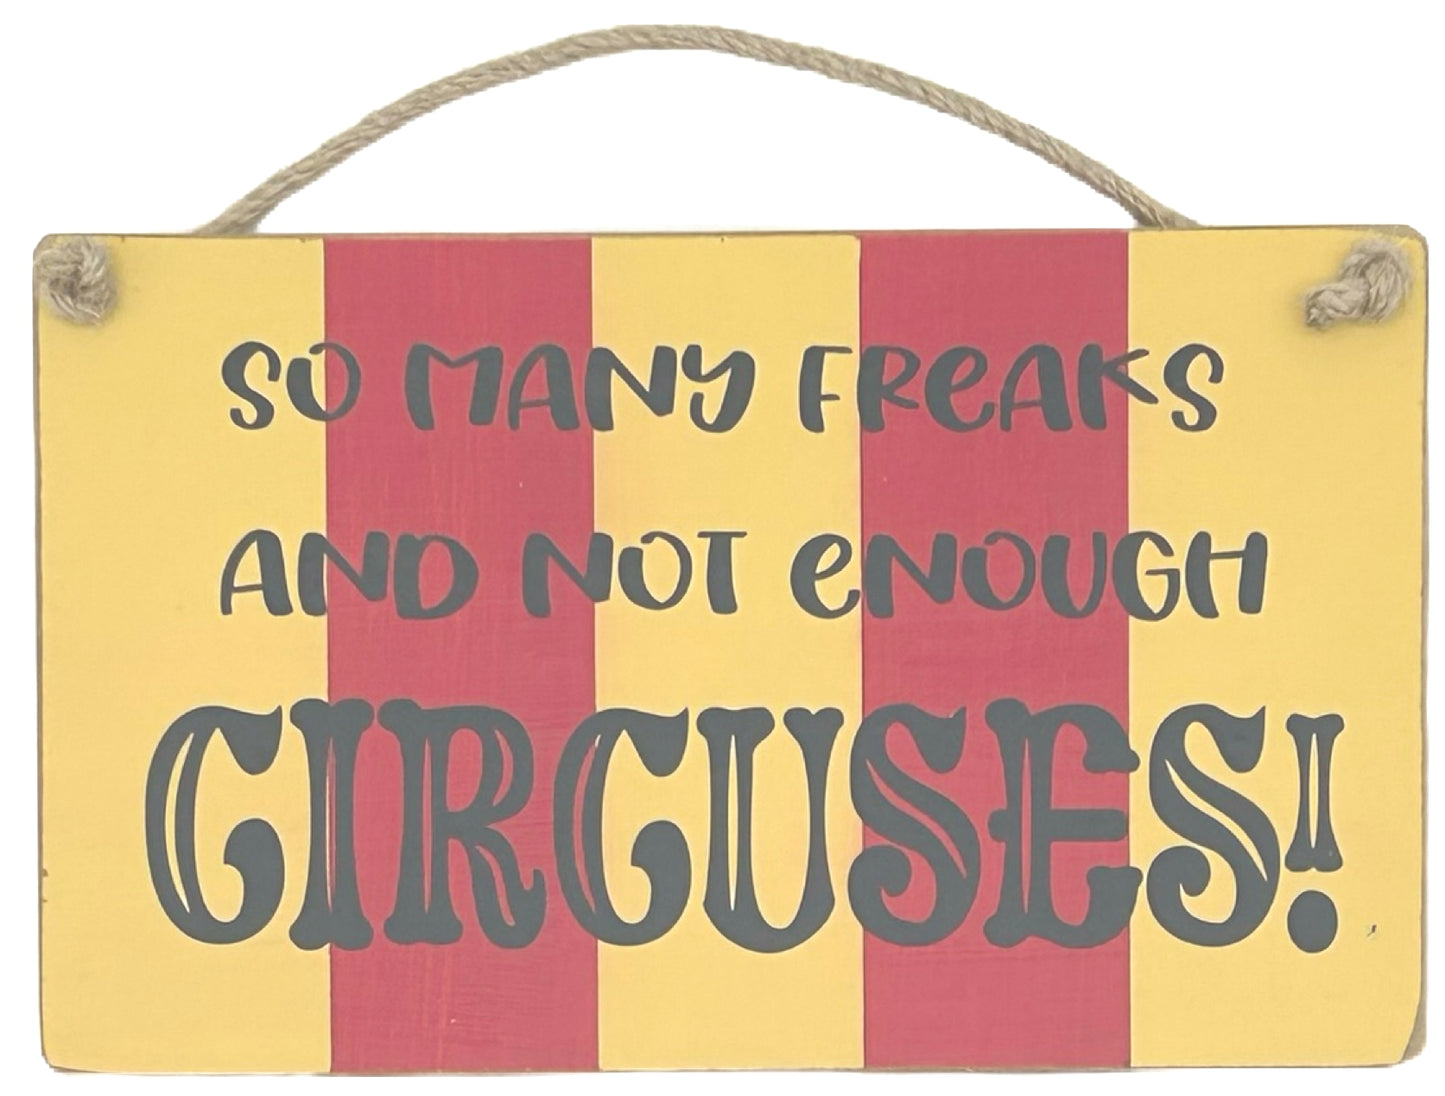 So many freaks and not enough Circuses Carnival Hanging plaque